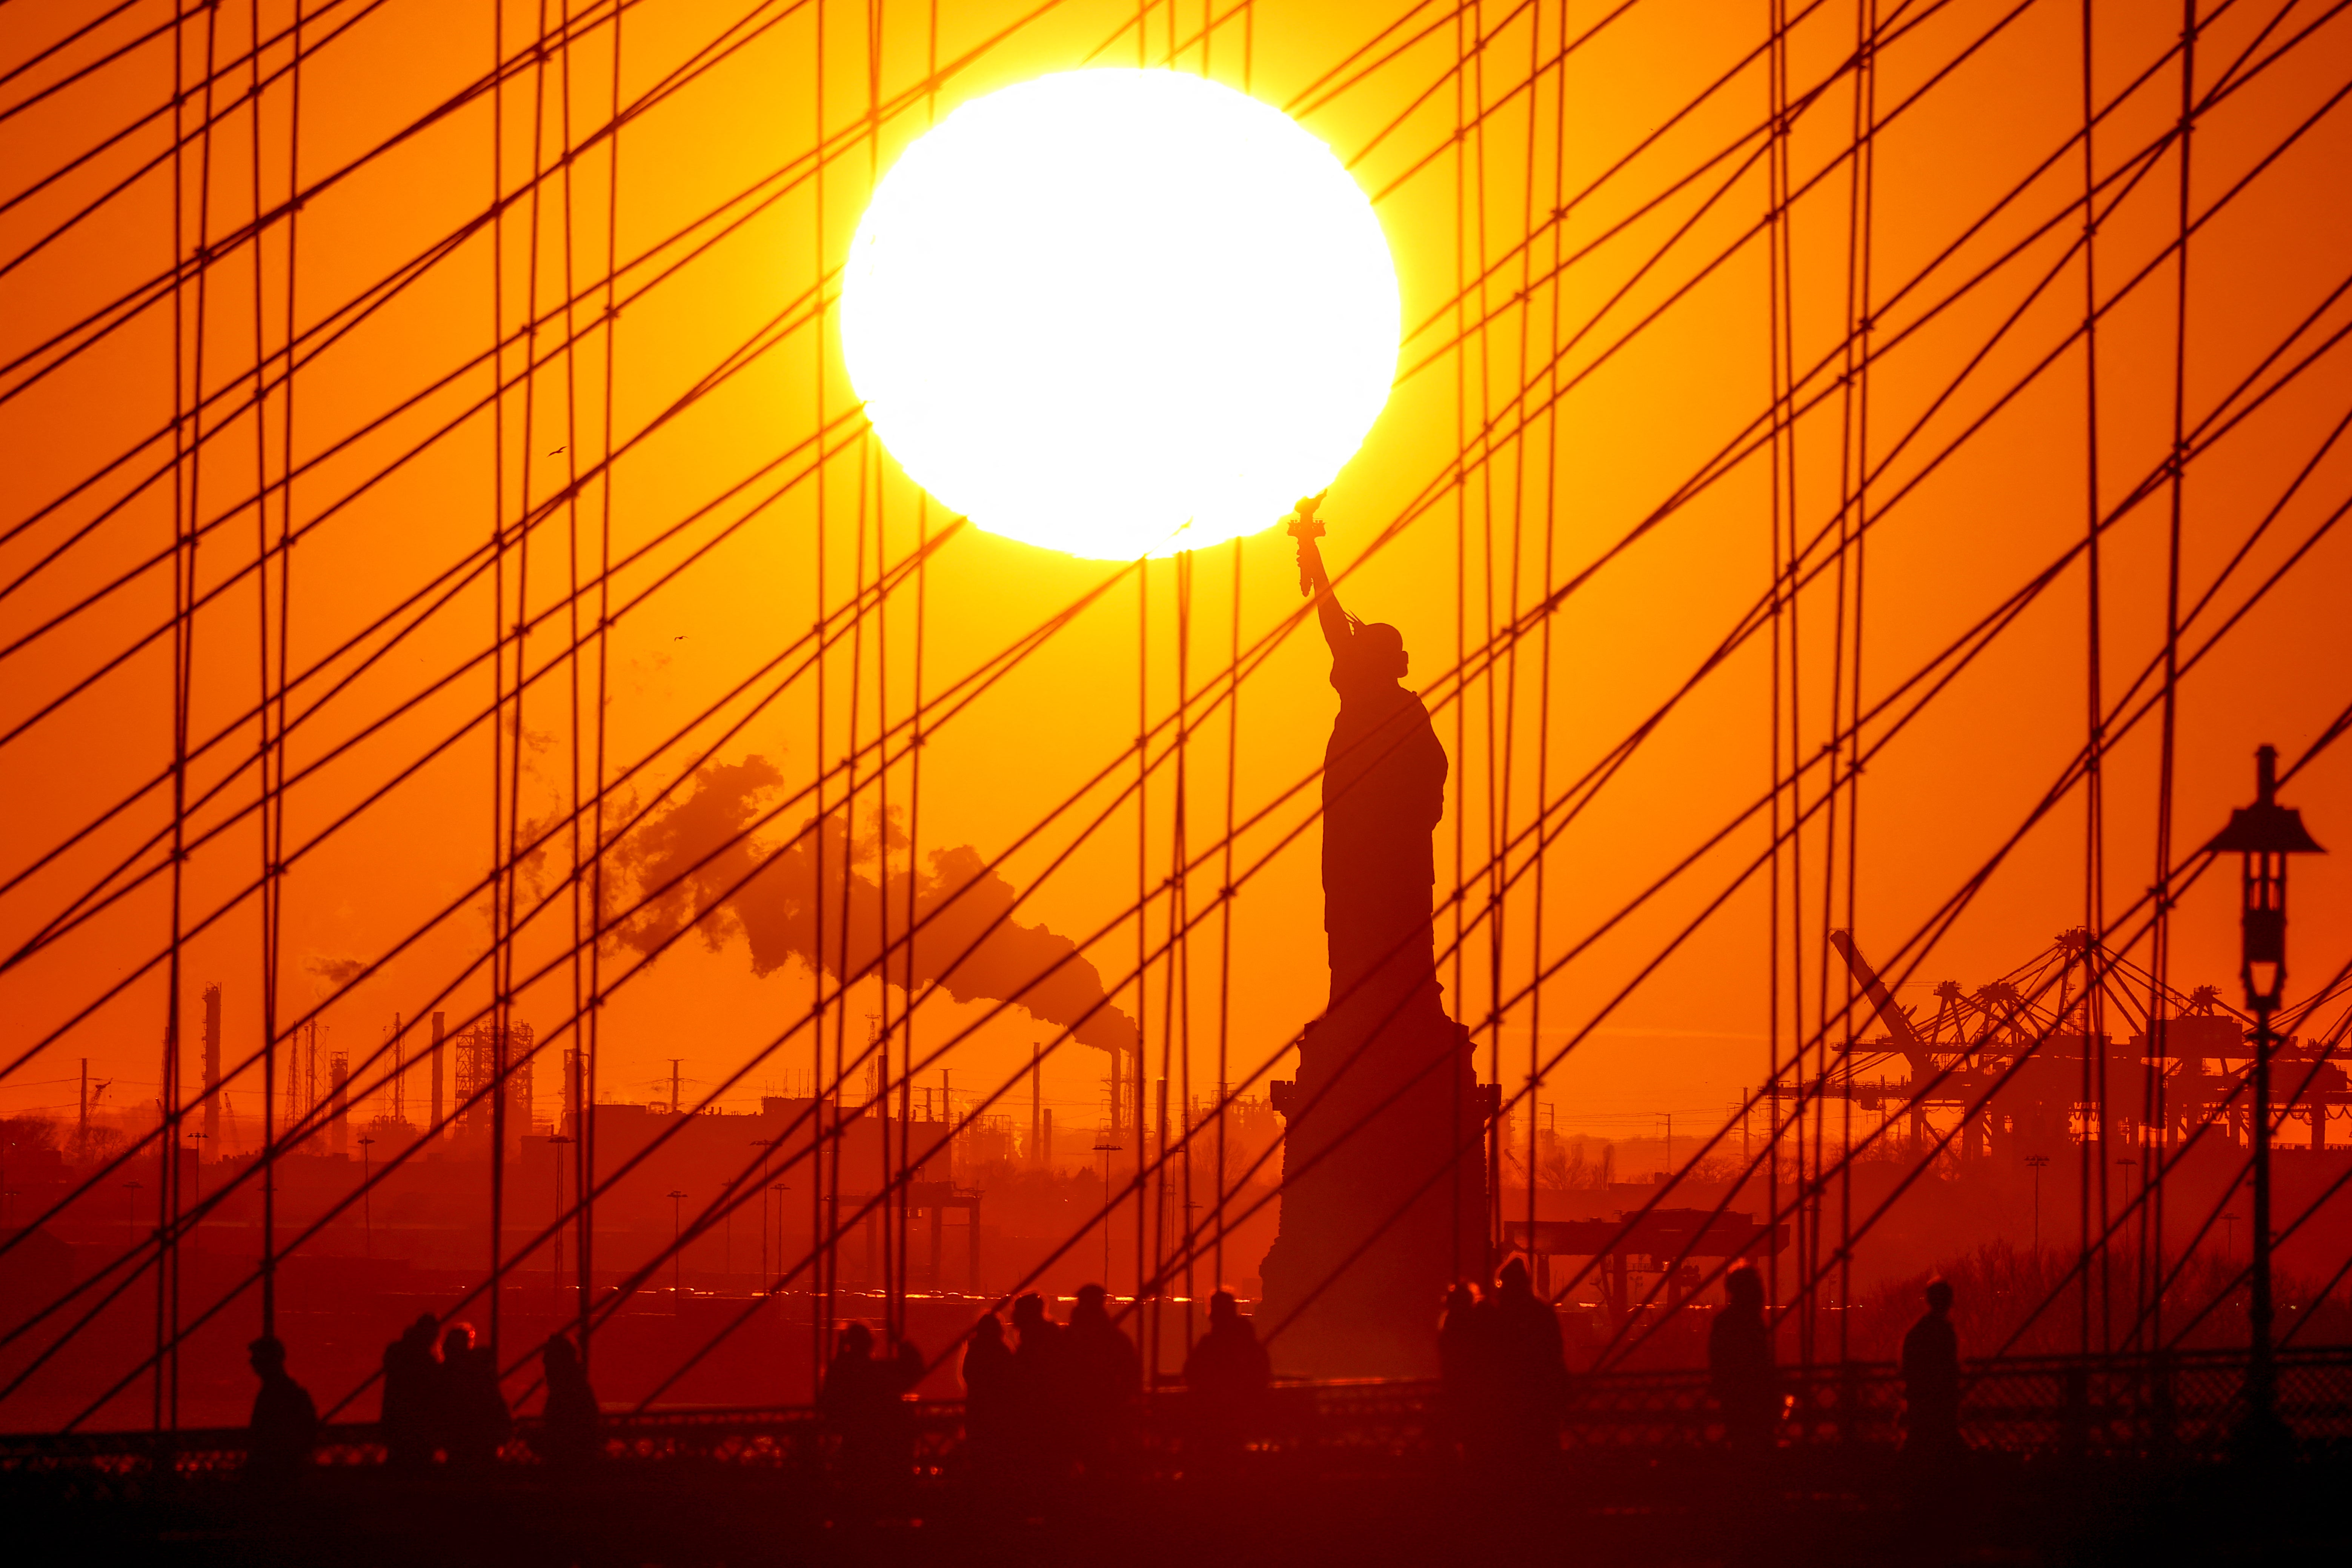 The sun sets behind the Statue of Liberty